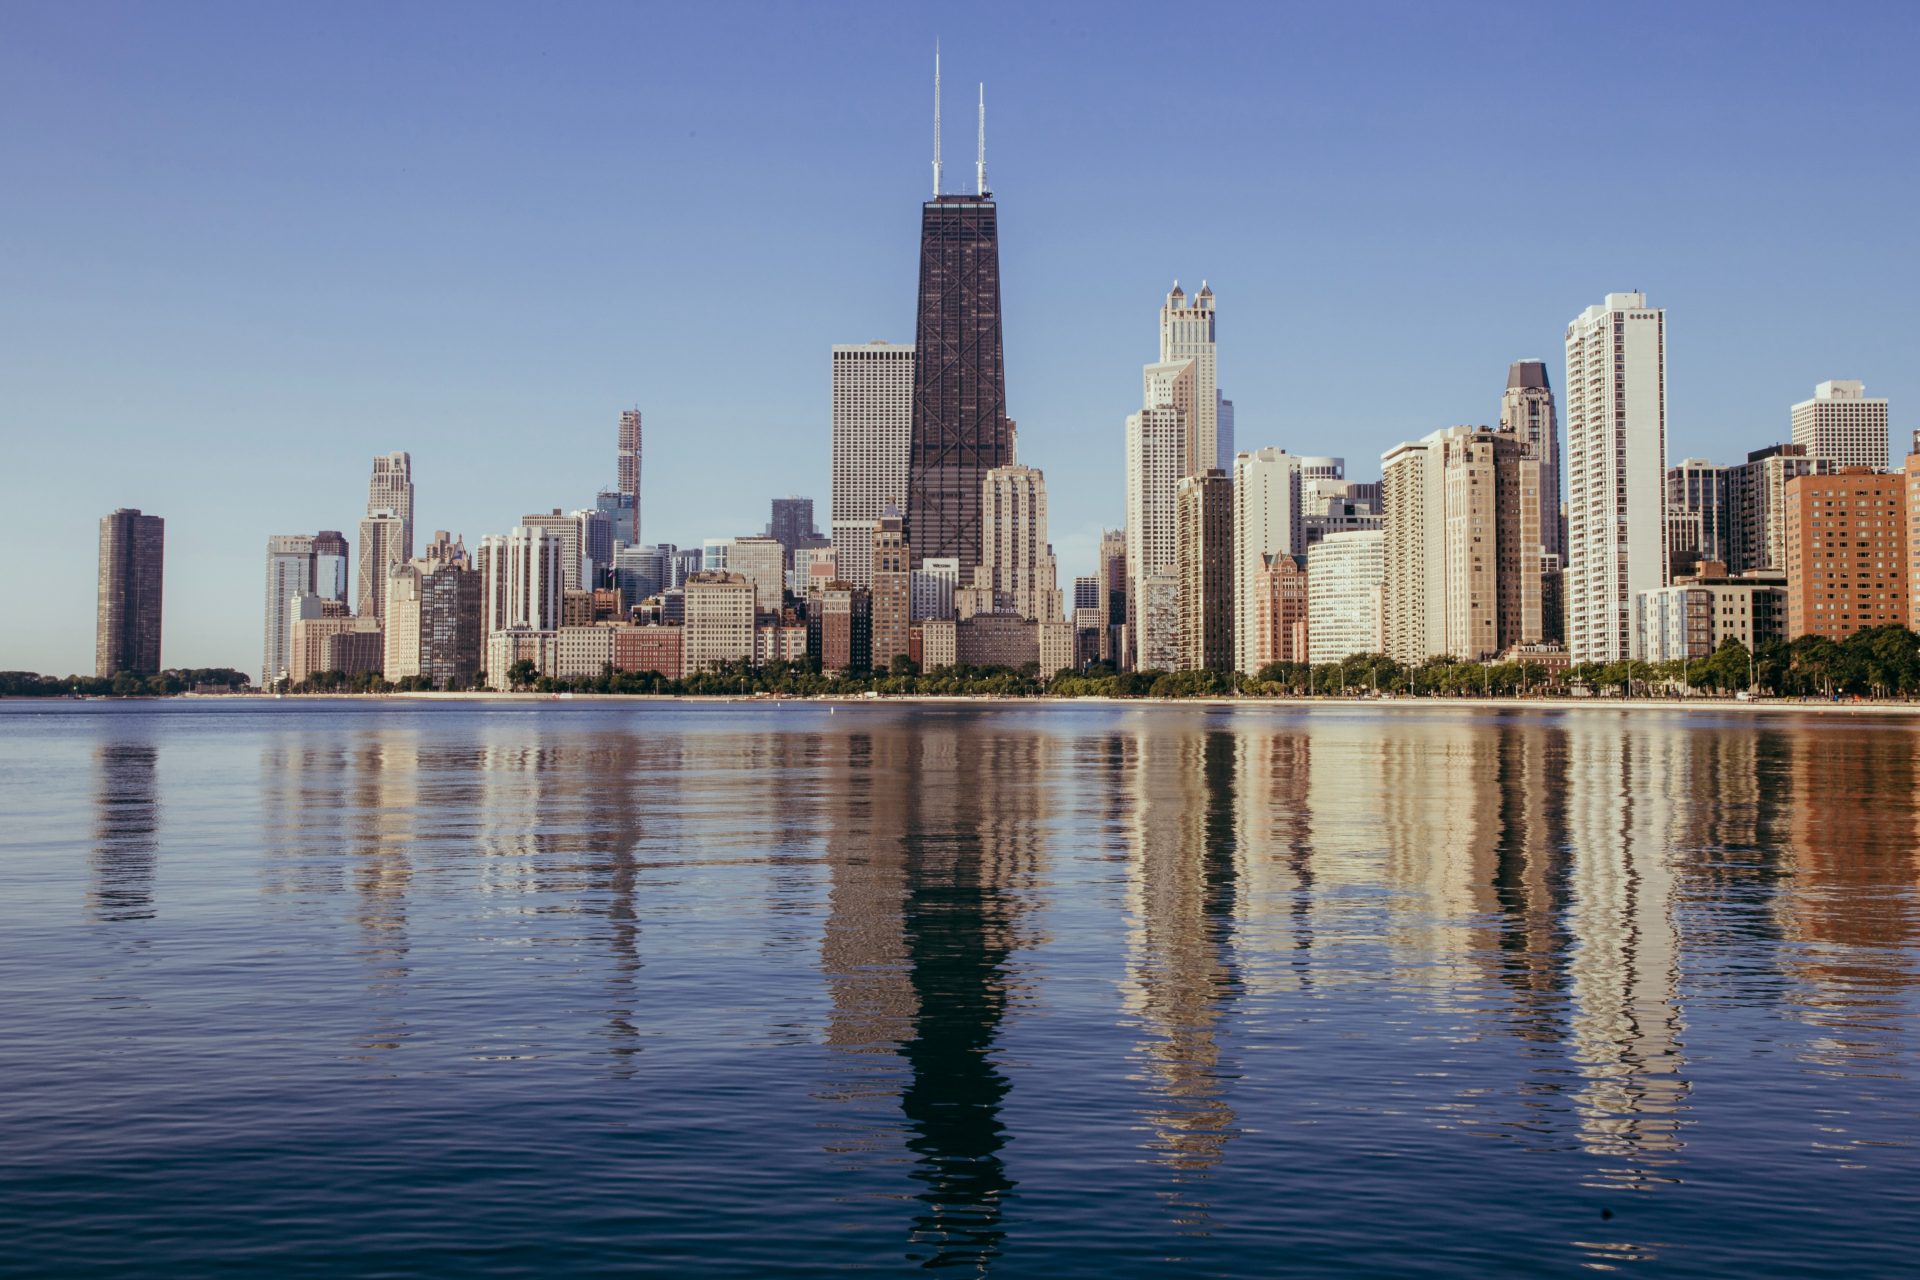 View of the downtown Chicago skyline